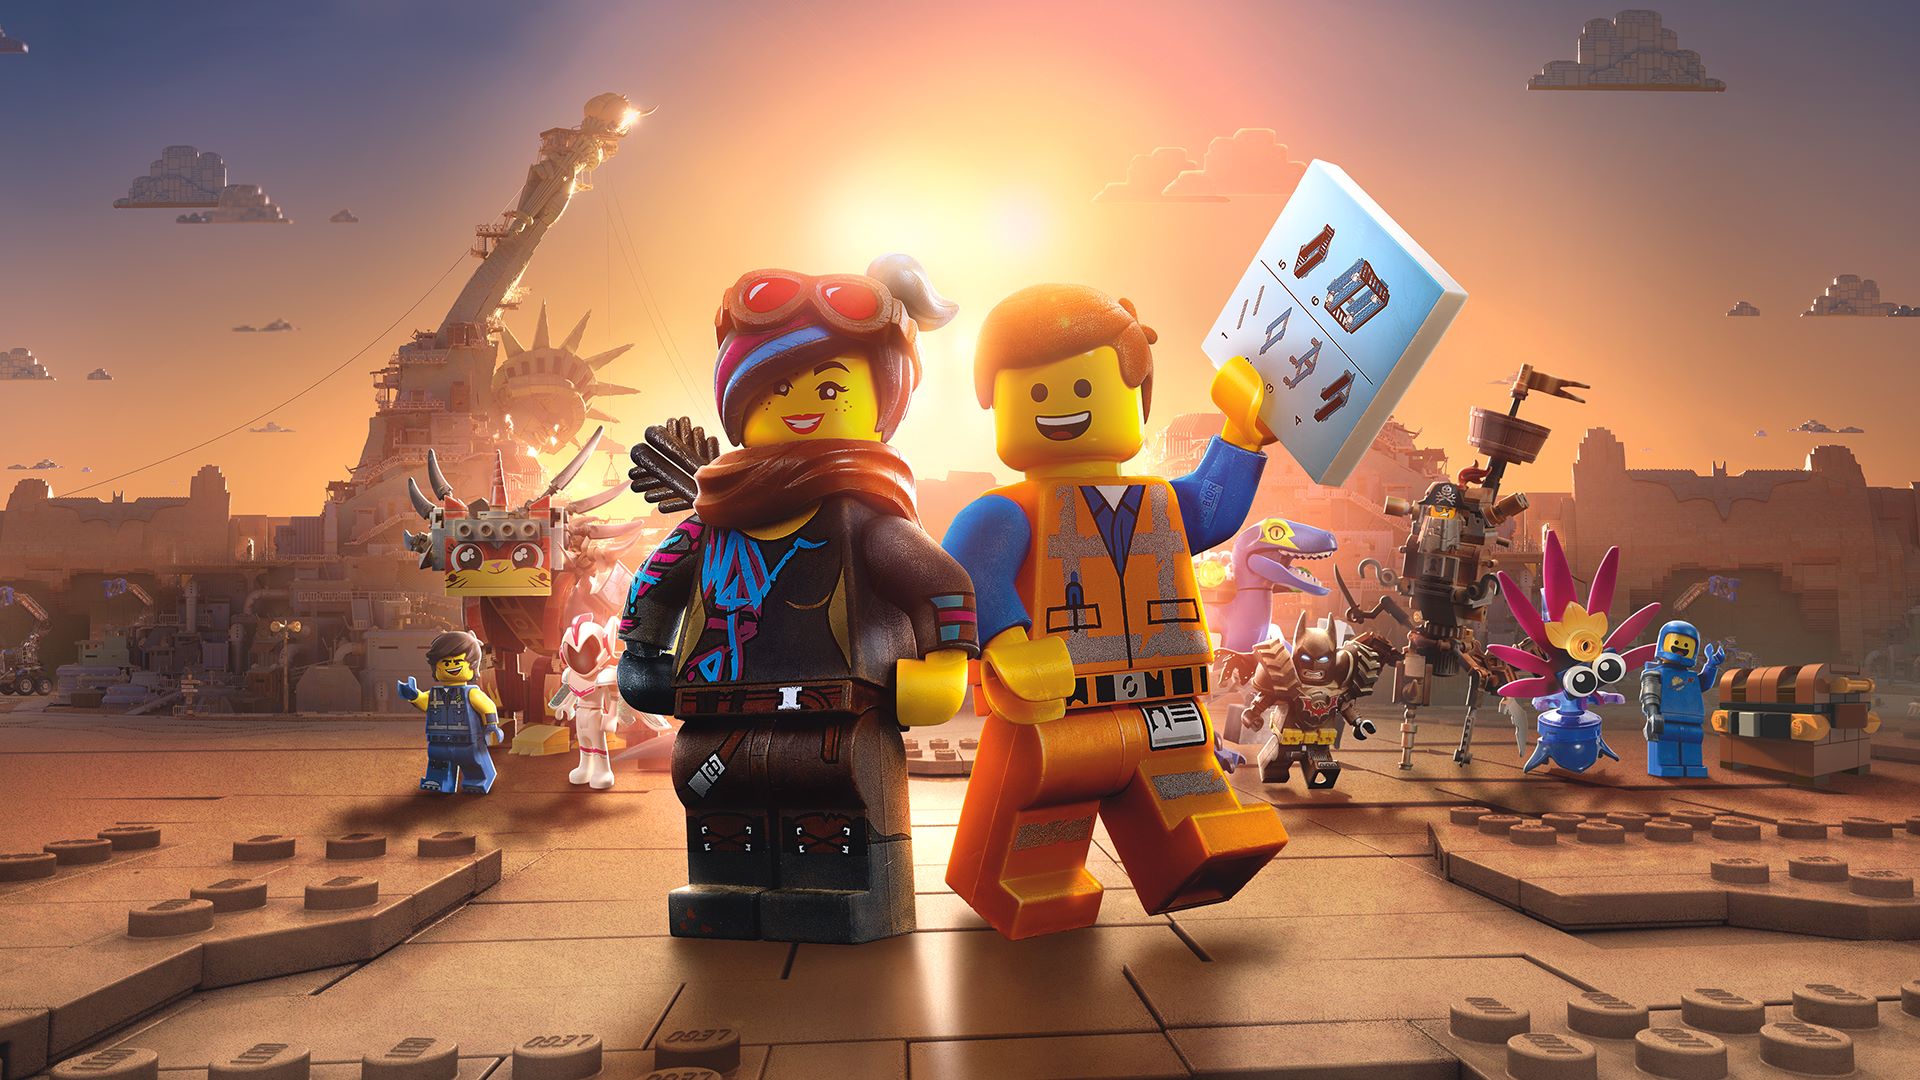 REVIEW: The LEGO Movie 2: The Second Part